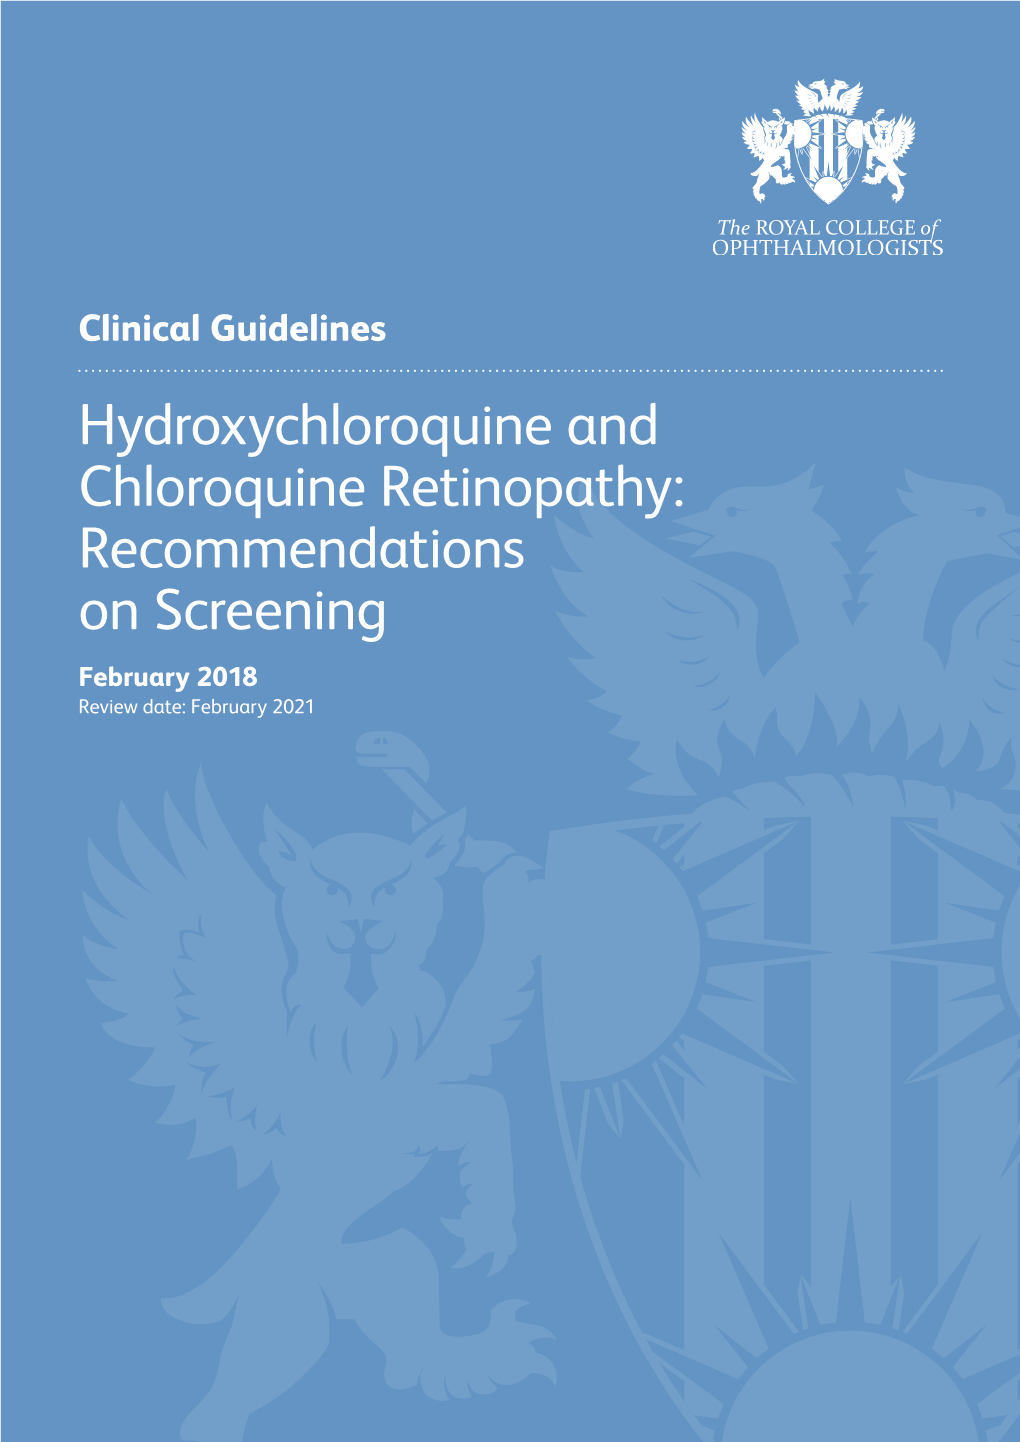 Hydroxychloroquine and Chloroquine Retinopathy: Recommendations on Screening